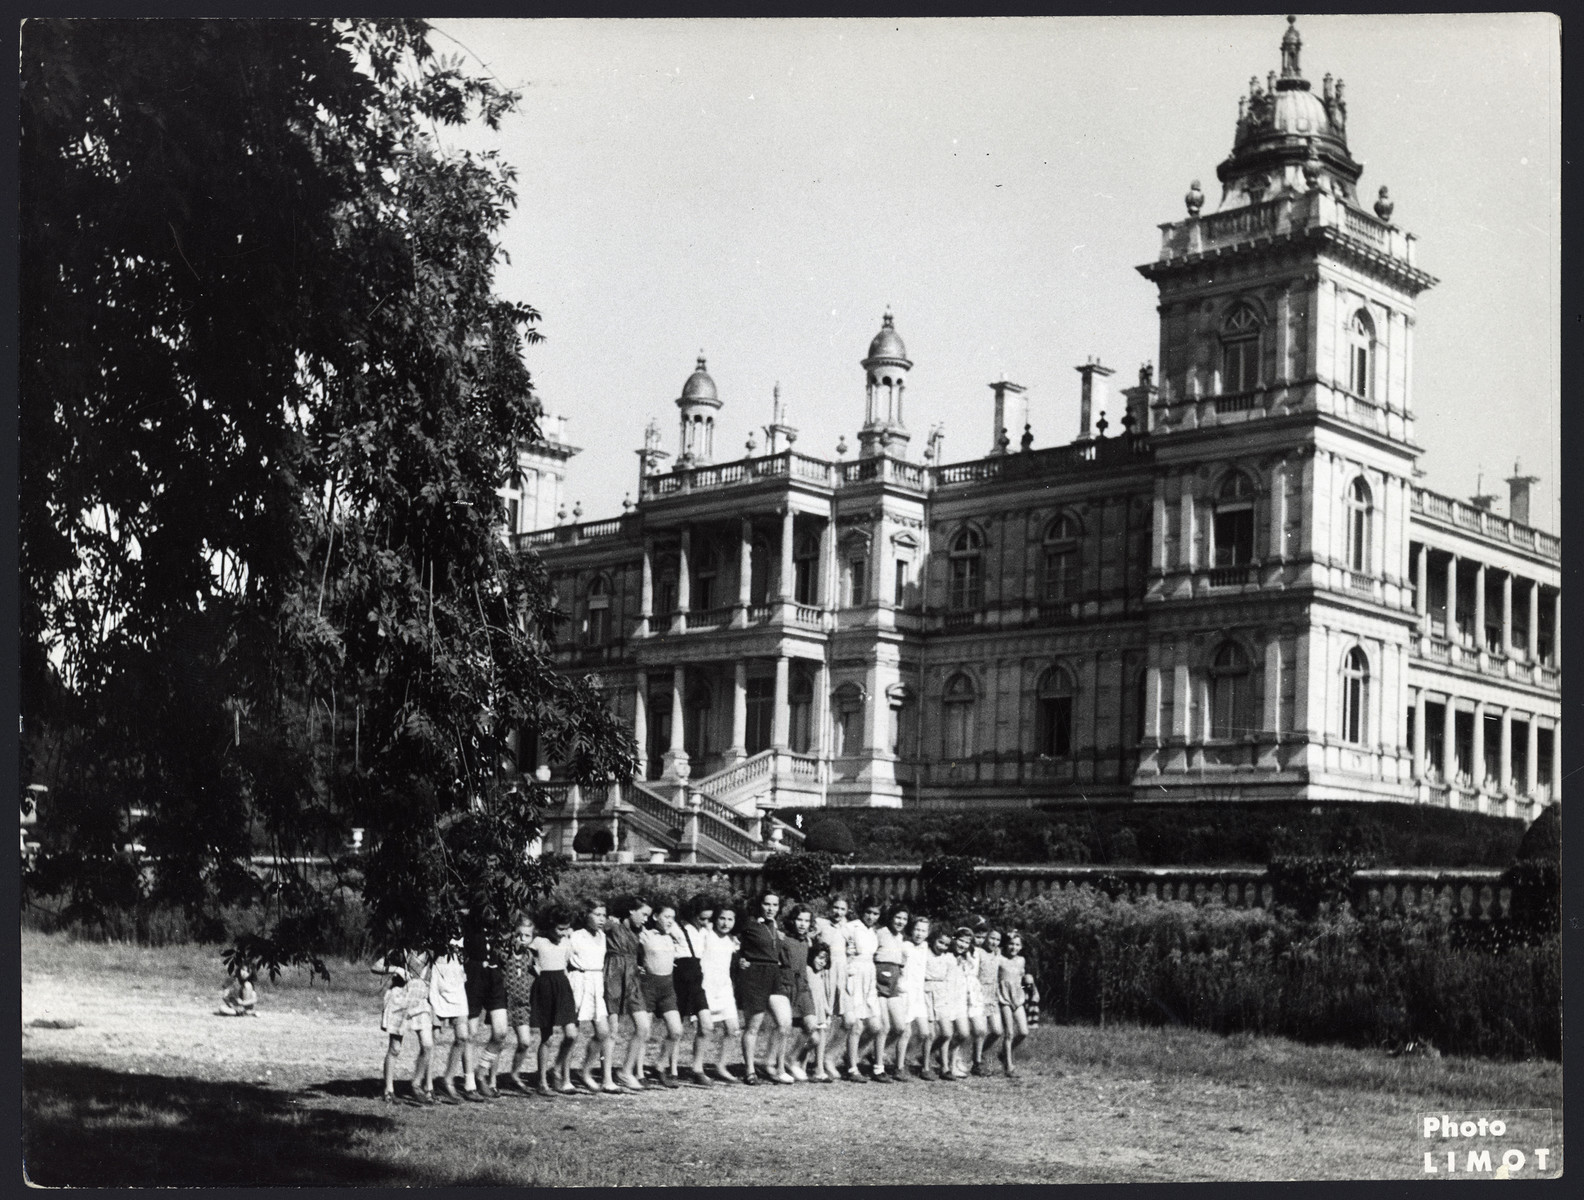 Girls walk in a row on the grounds of the Rothschild castle.

The original caption reads "Vacation at the Rothschild castle."